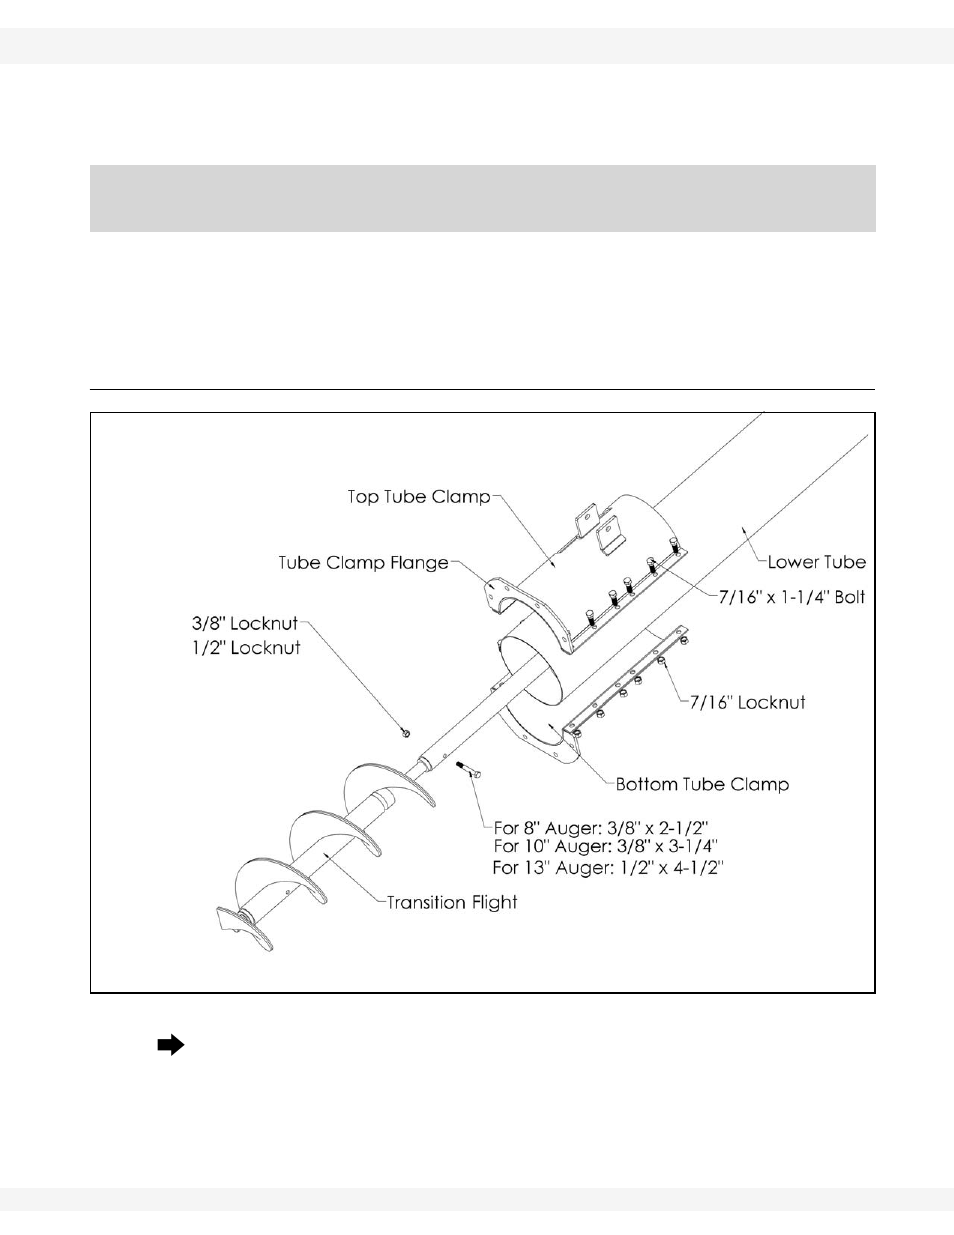 Assembly, Tube clamps and transition flight assembly | Wheatheart GHR Augers Intake Hopper User Manual | Page 7 / 18